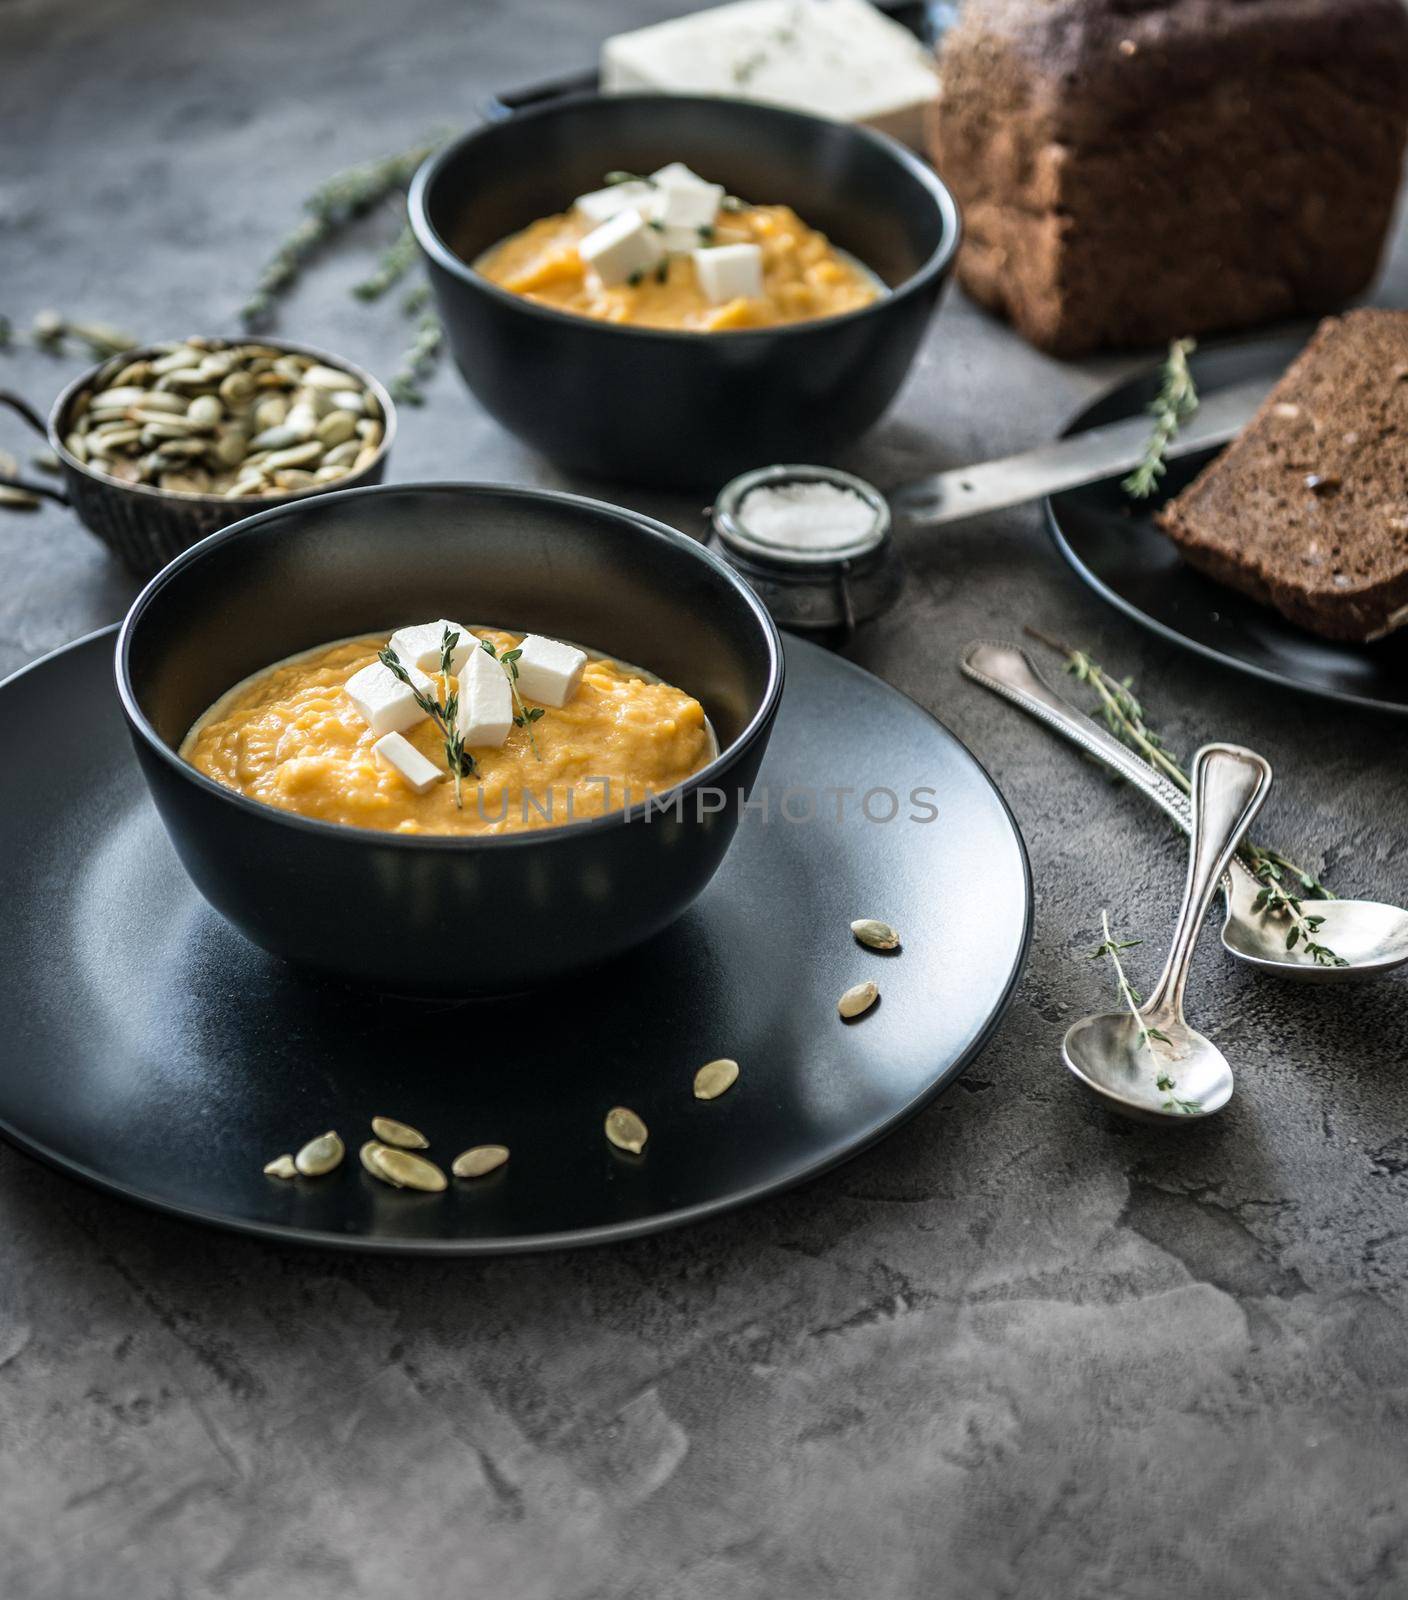 pumpkin soup in black plates on a gray concrete background